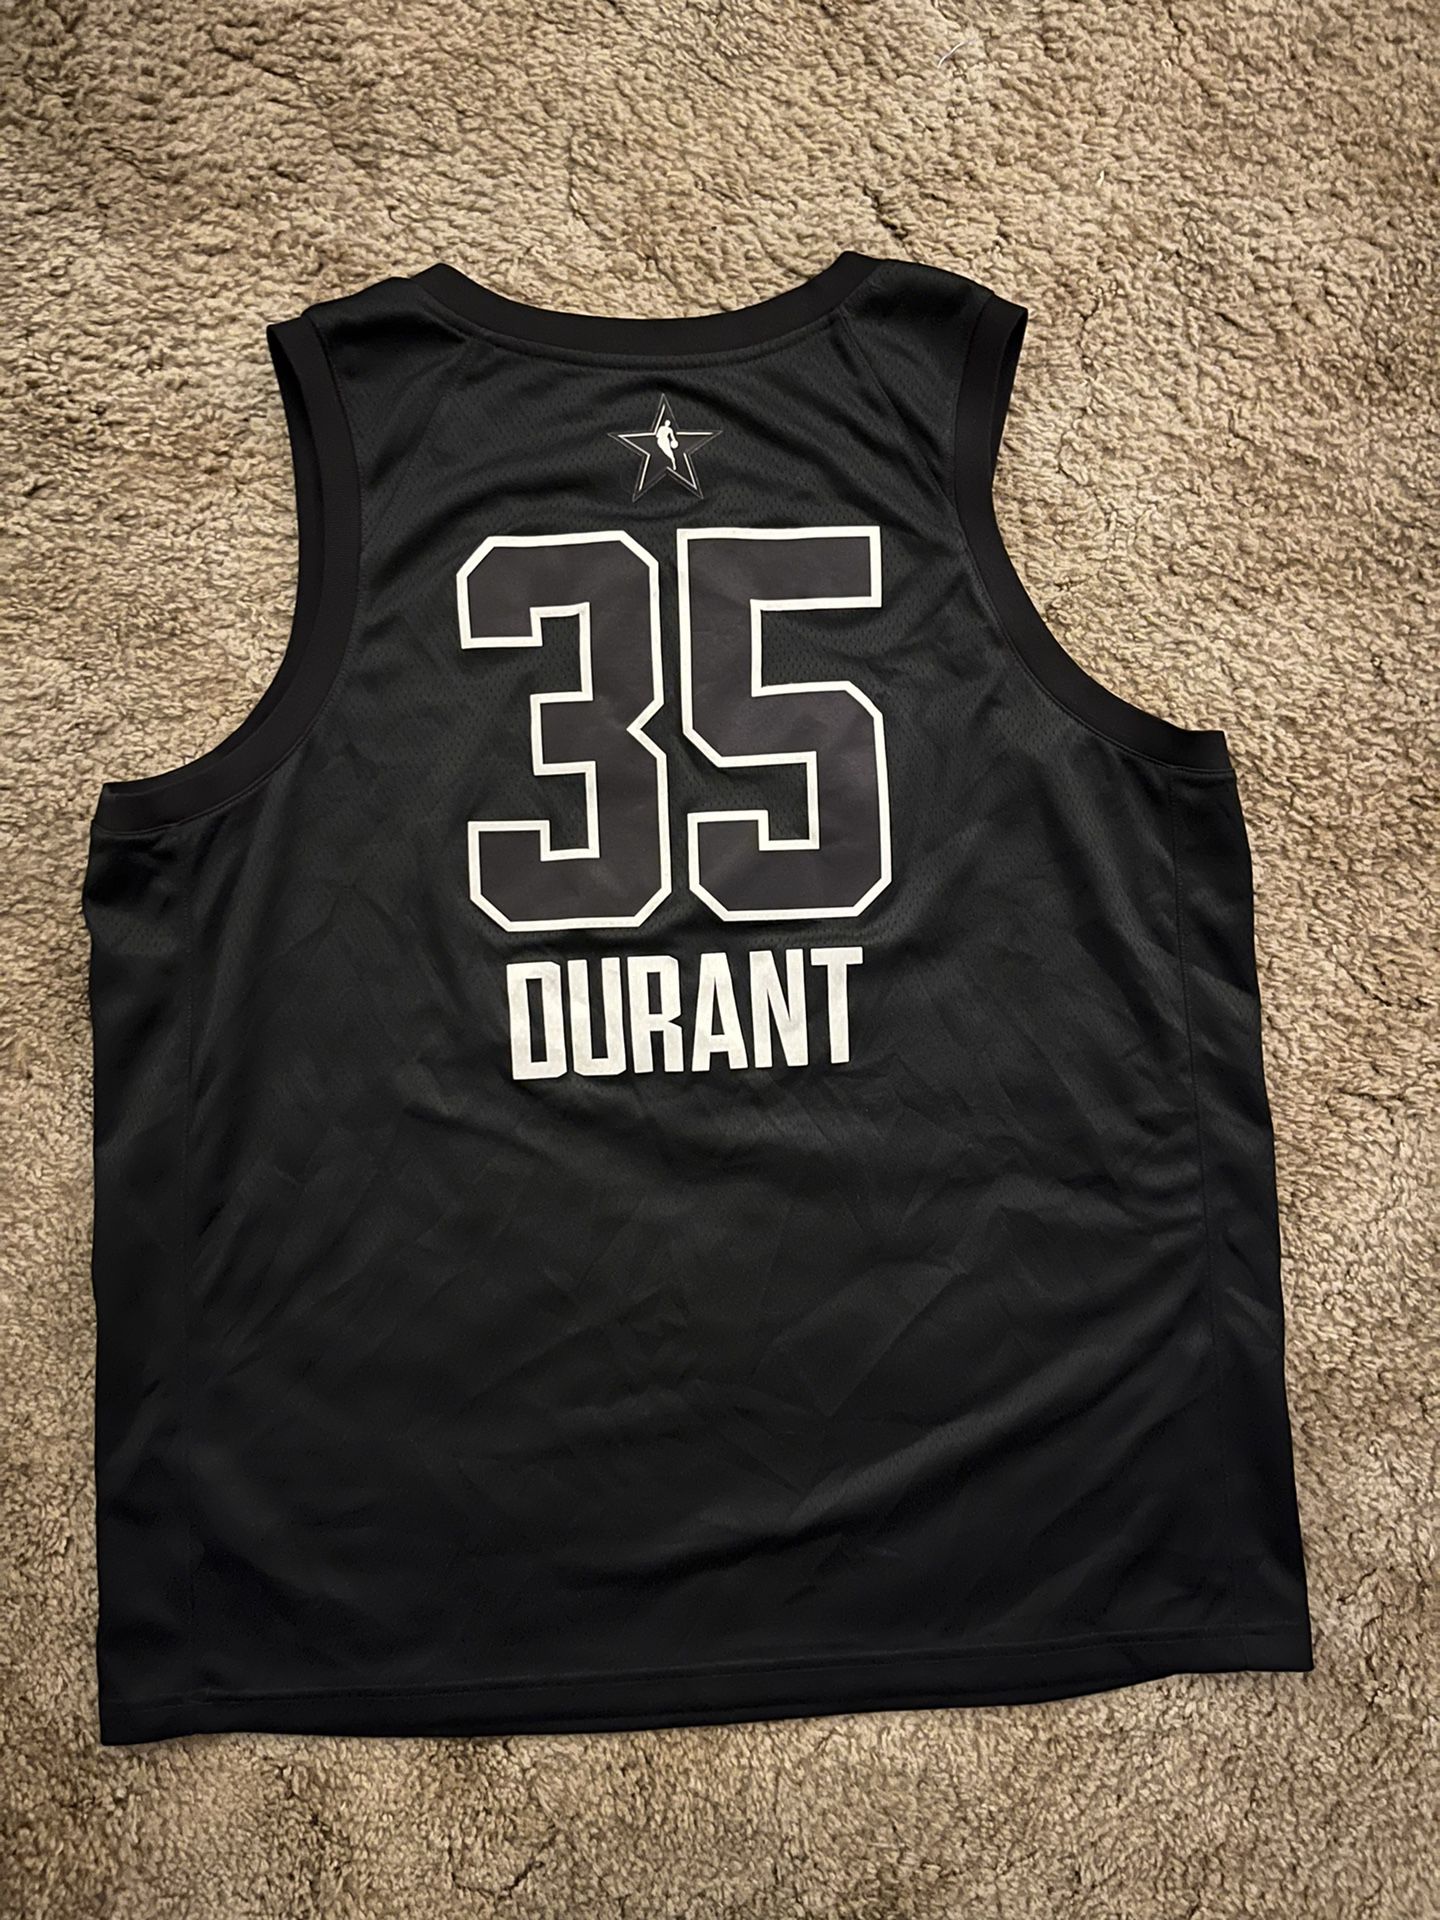 New Nike, Swingman, NBA, Golden State Warriors, Kevin Durant, Chinese New  Year, Jersey, Grey, Size 52/XL for Sale in Hayward, CA - OfferUp